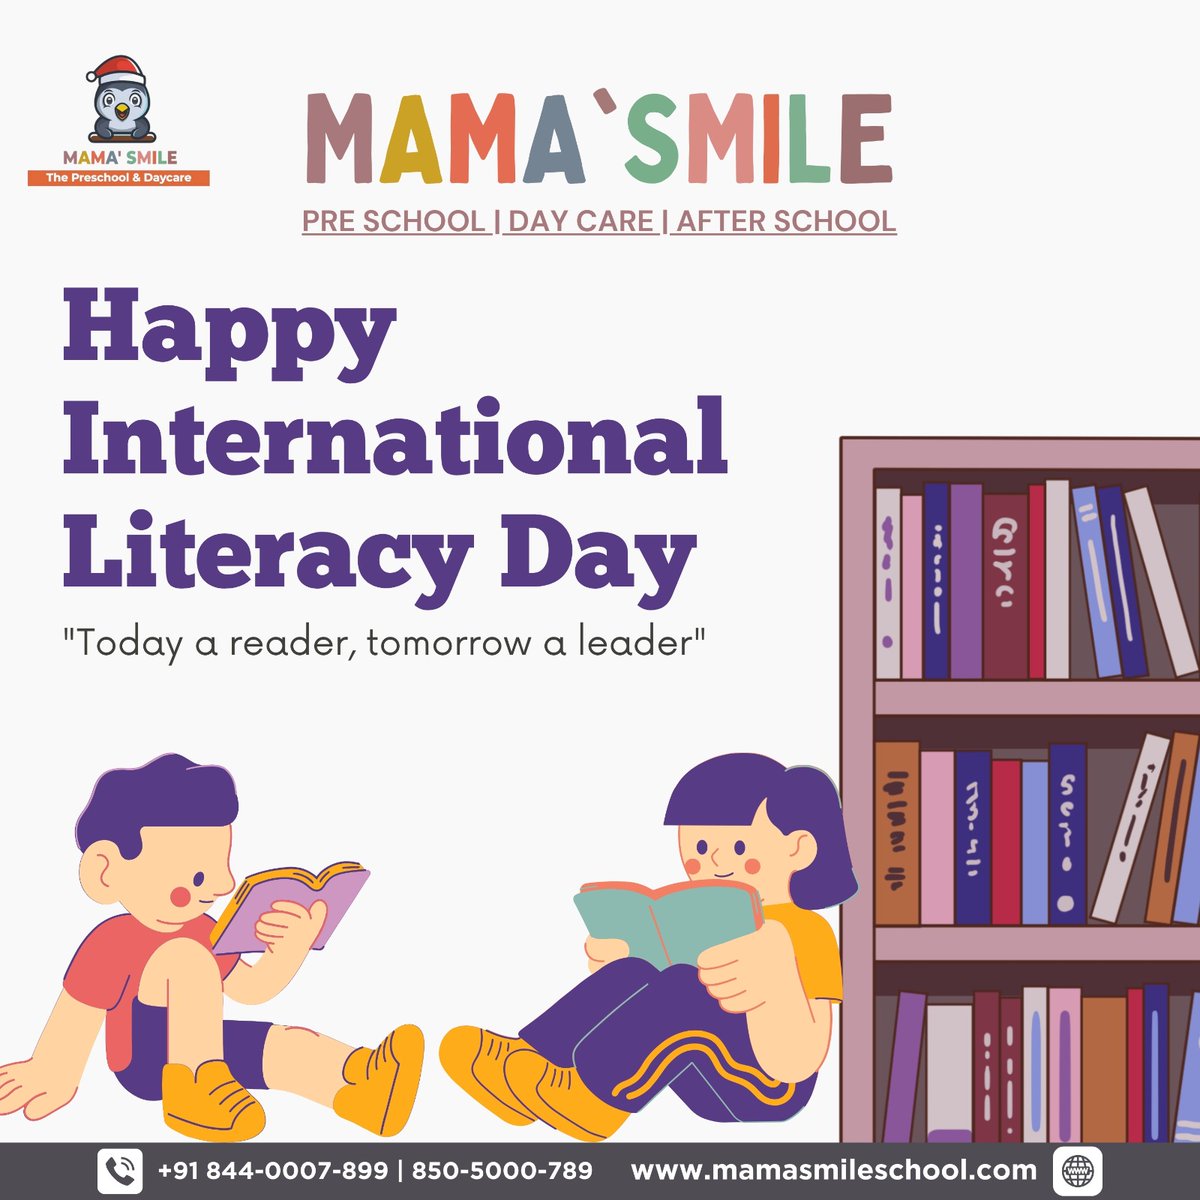 Today, let's celebrate the power of words, the joy of reading, and the freedom that literacy brings. Happy World Literacy Day!

#LiteracyDay #ReadToLead #EducationForAll #GlobalLiteracy #LiteracyMatters #LearnToRead #BooksChangeLives #EmpowerThroughWords #KnowledgeIsPower